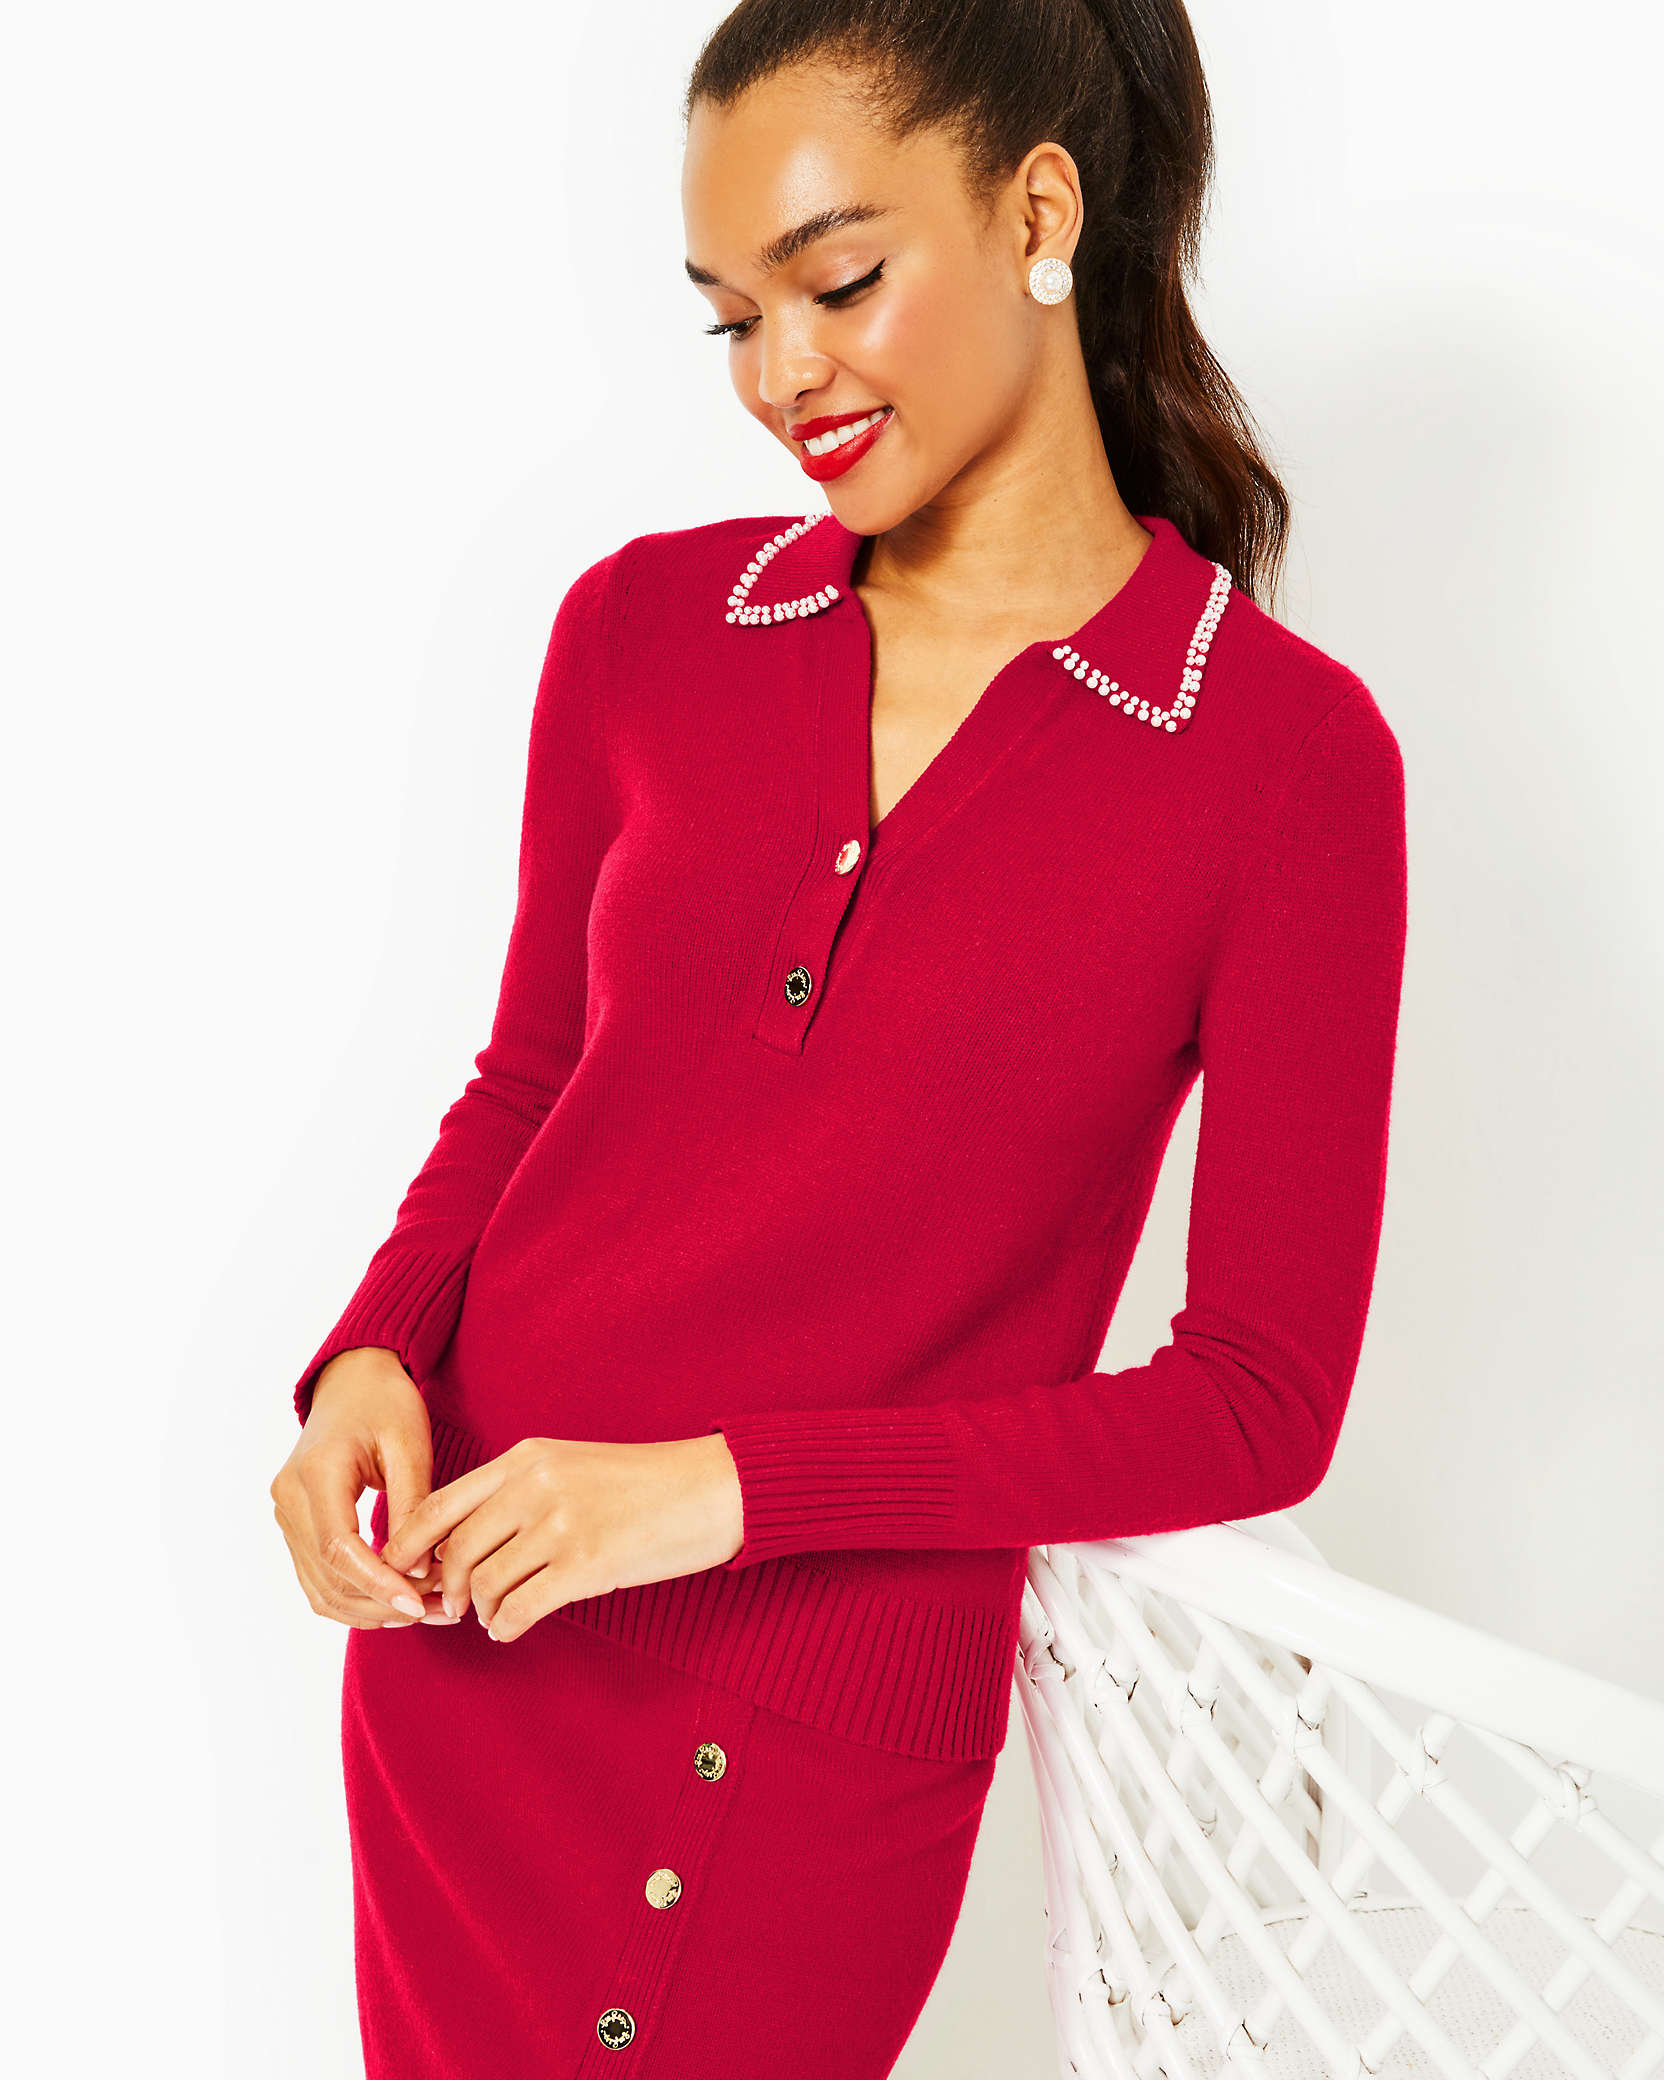 Lilly Pulitzer Lizona Sweater In Poinsettia Red